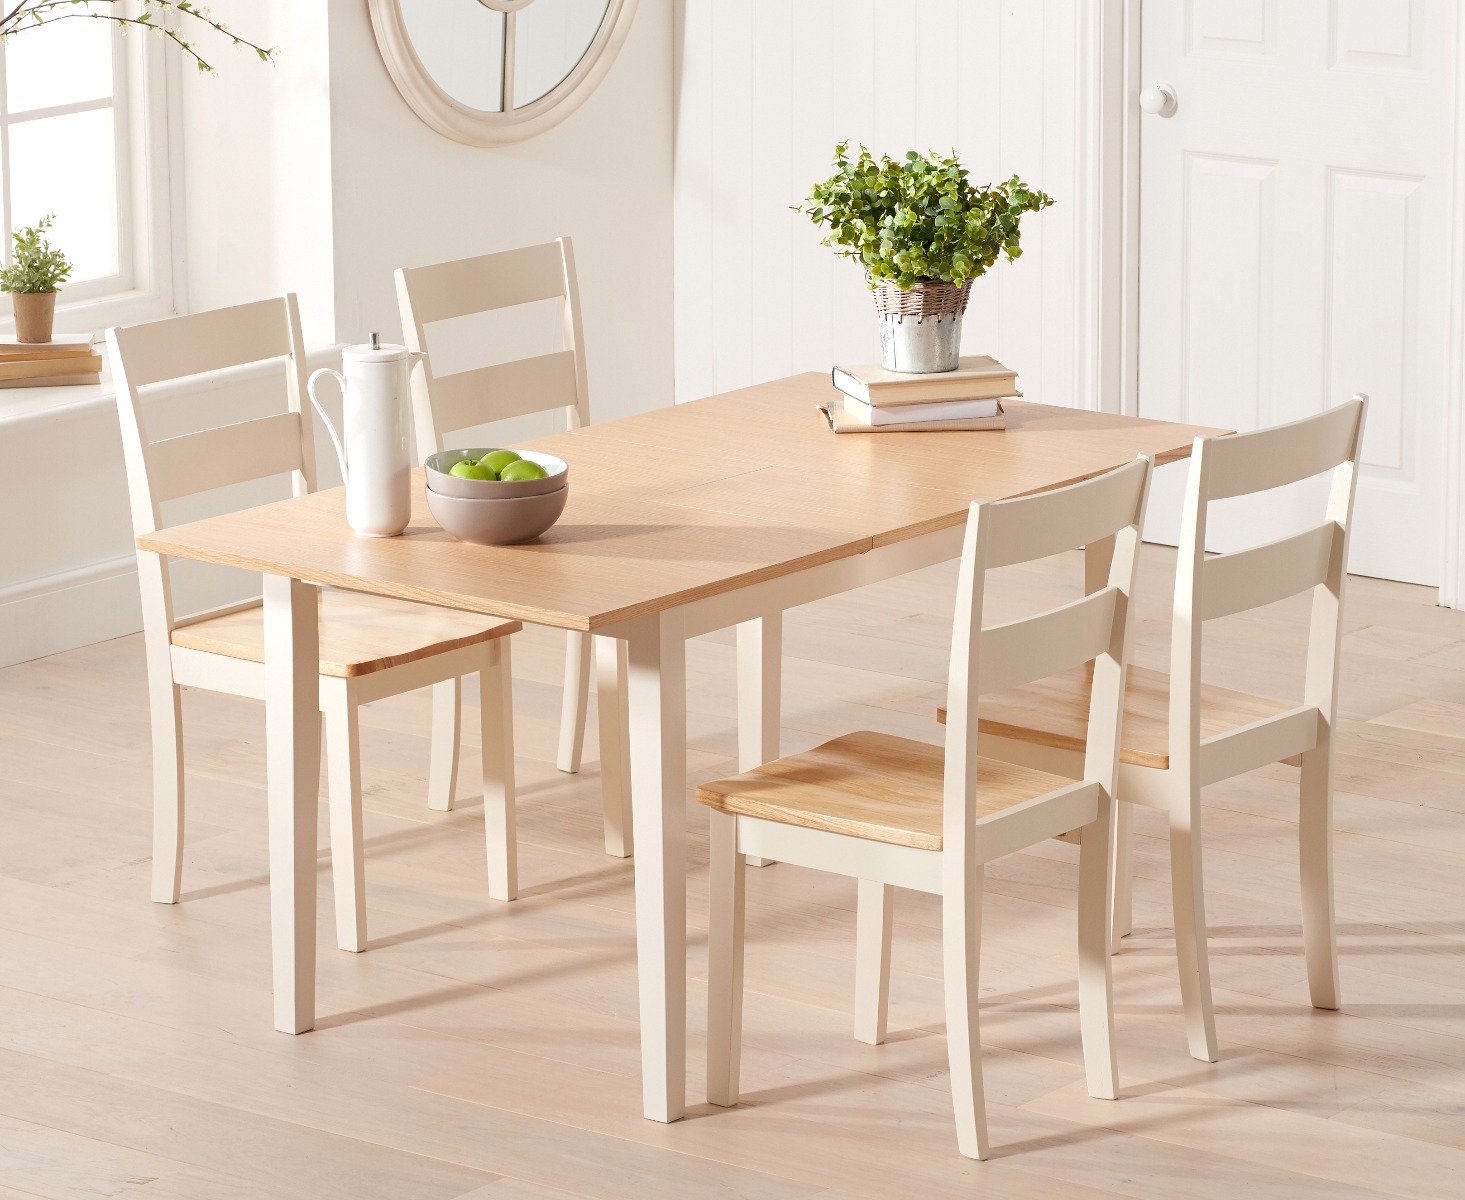 Chiltern 120cm Extending Cream Painted And Oak Table With 4 Cream Chiltern Chairs